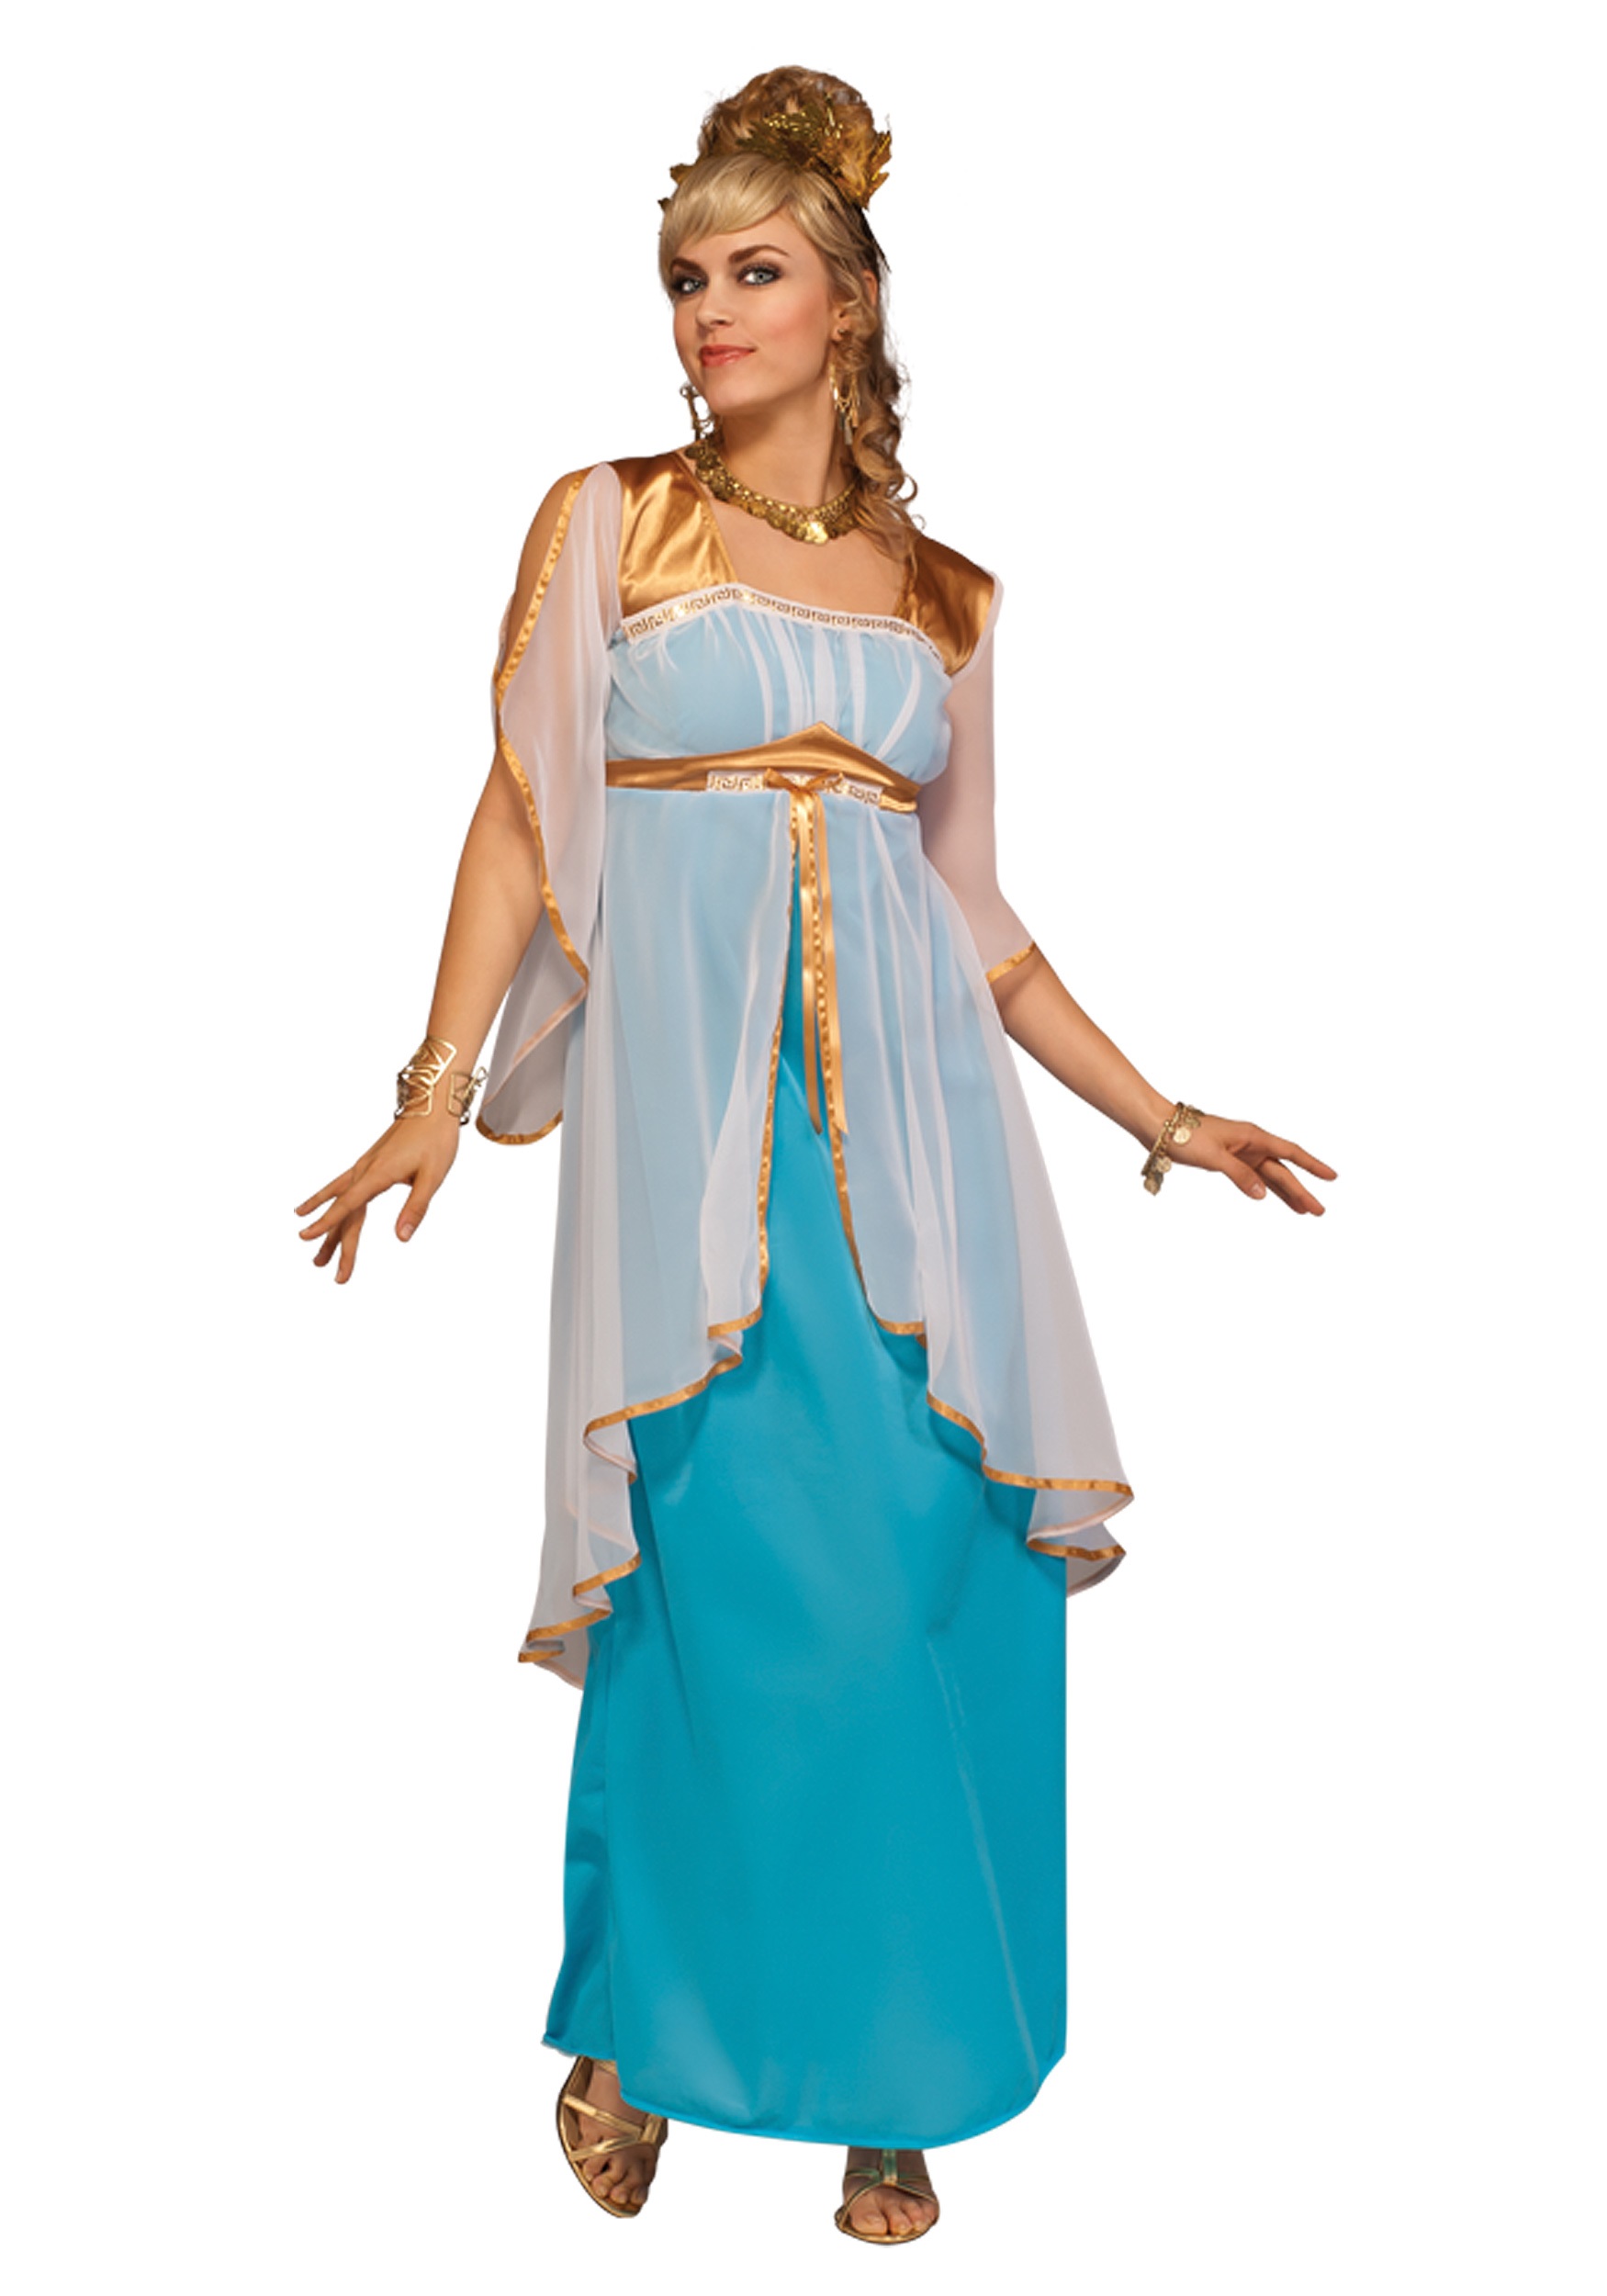 Our Helen of Troy Goddess Costume is a great greek mythology costume for yo...